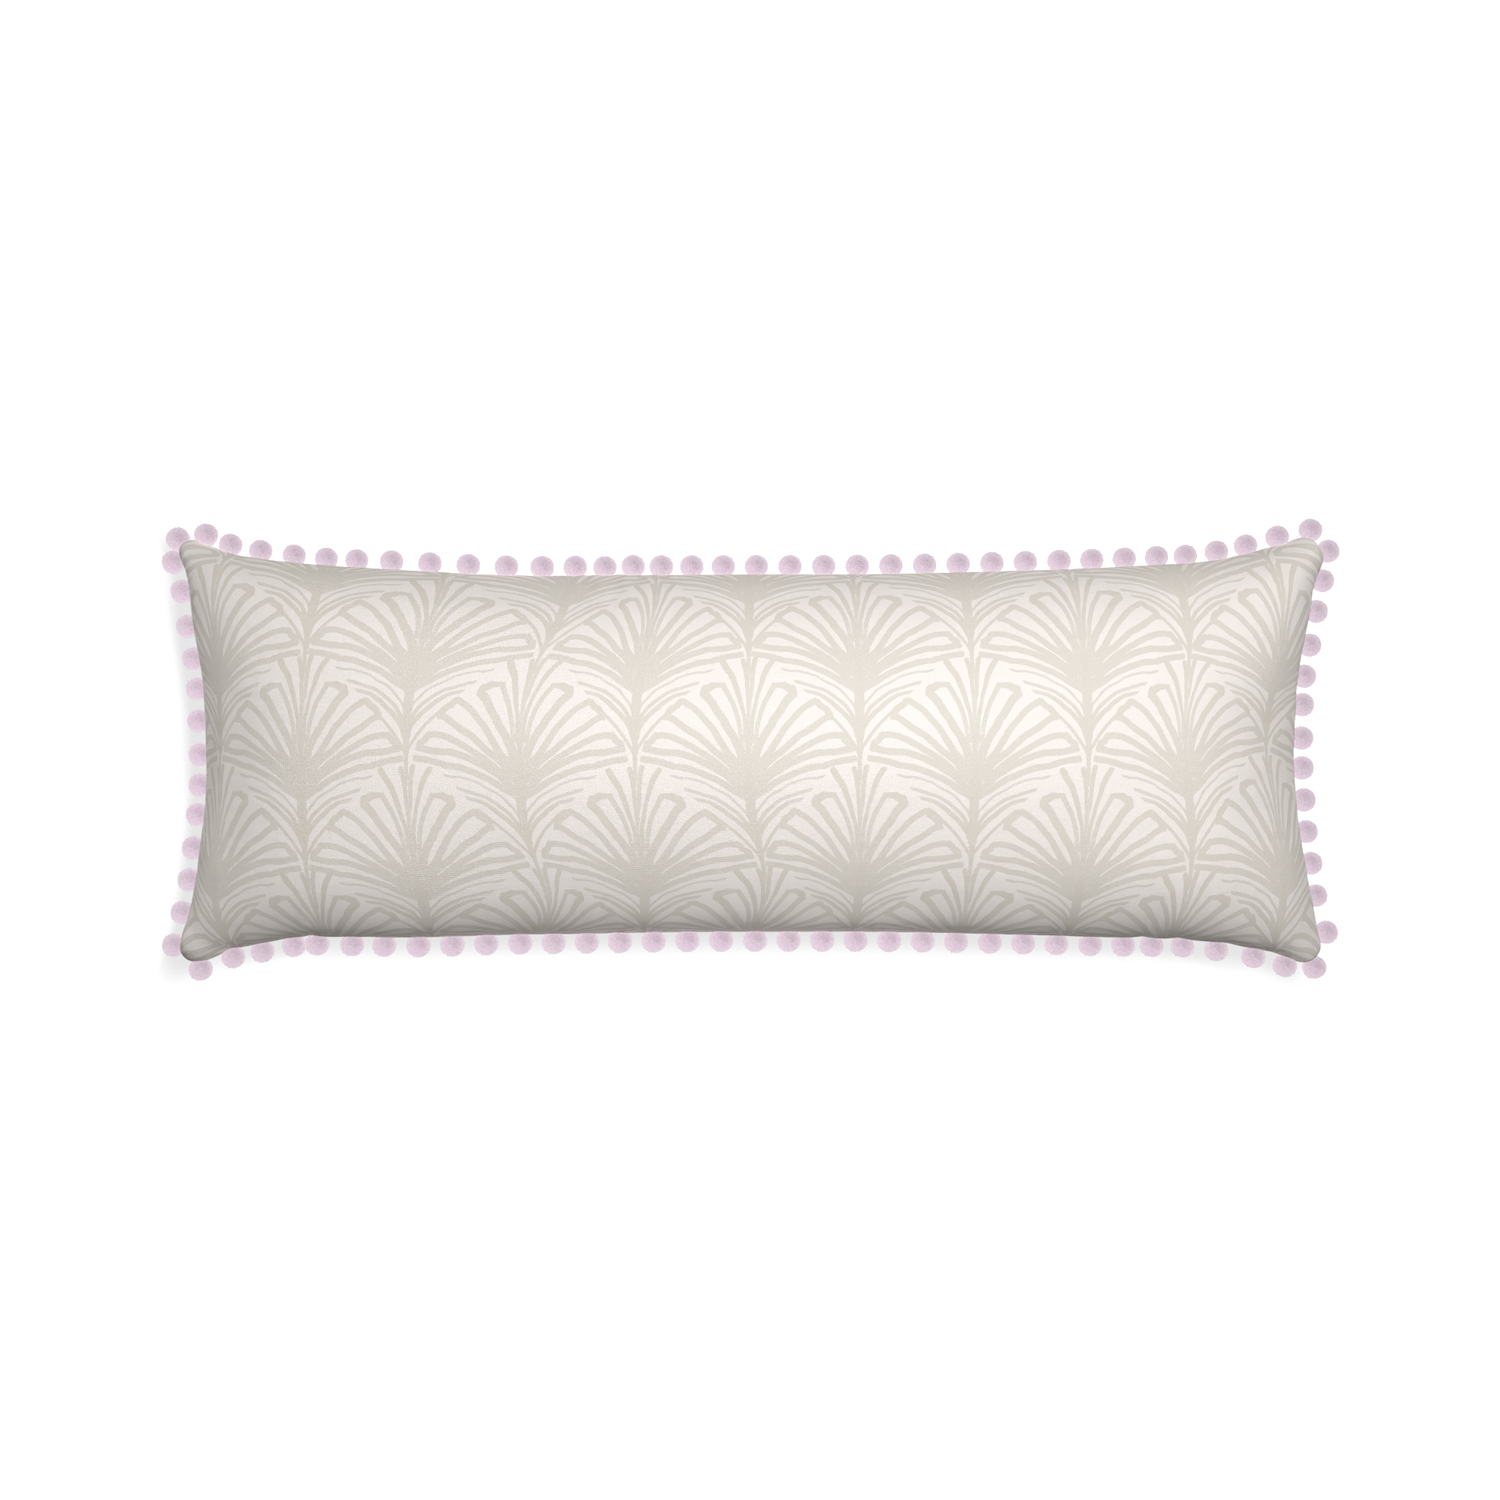 Xl-lumbar suzy sand custom beige palmpillow with l on white background